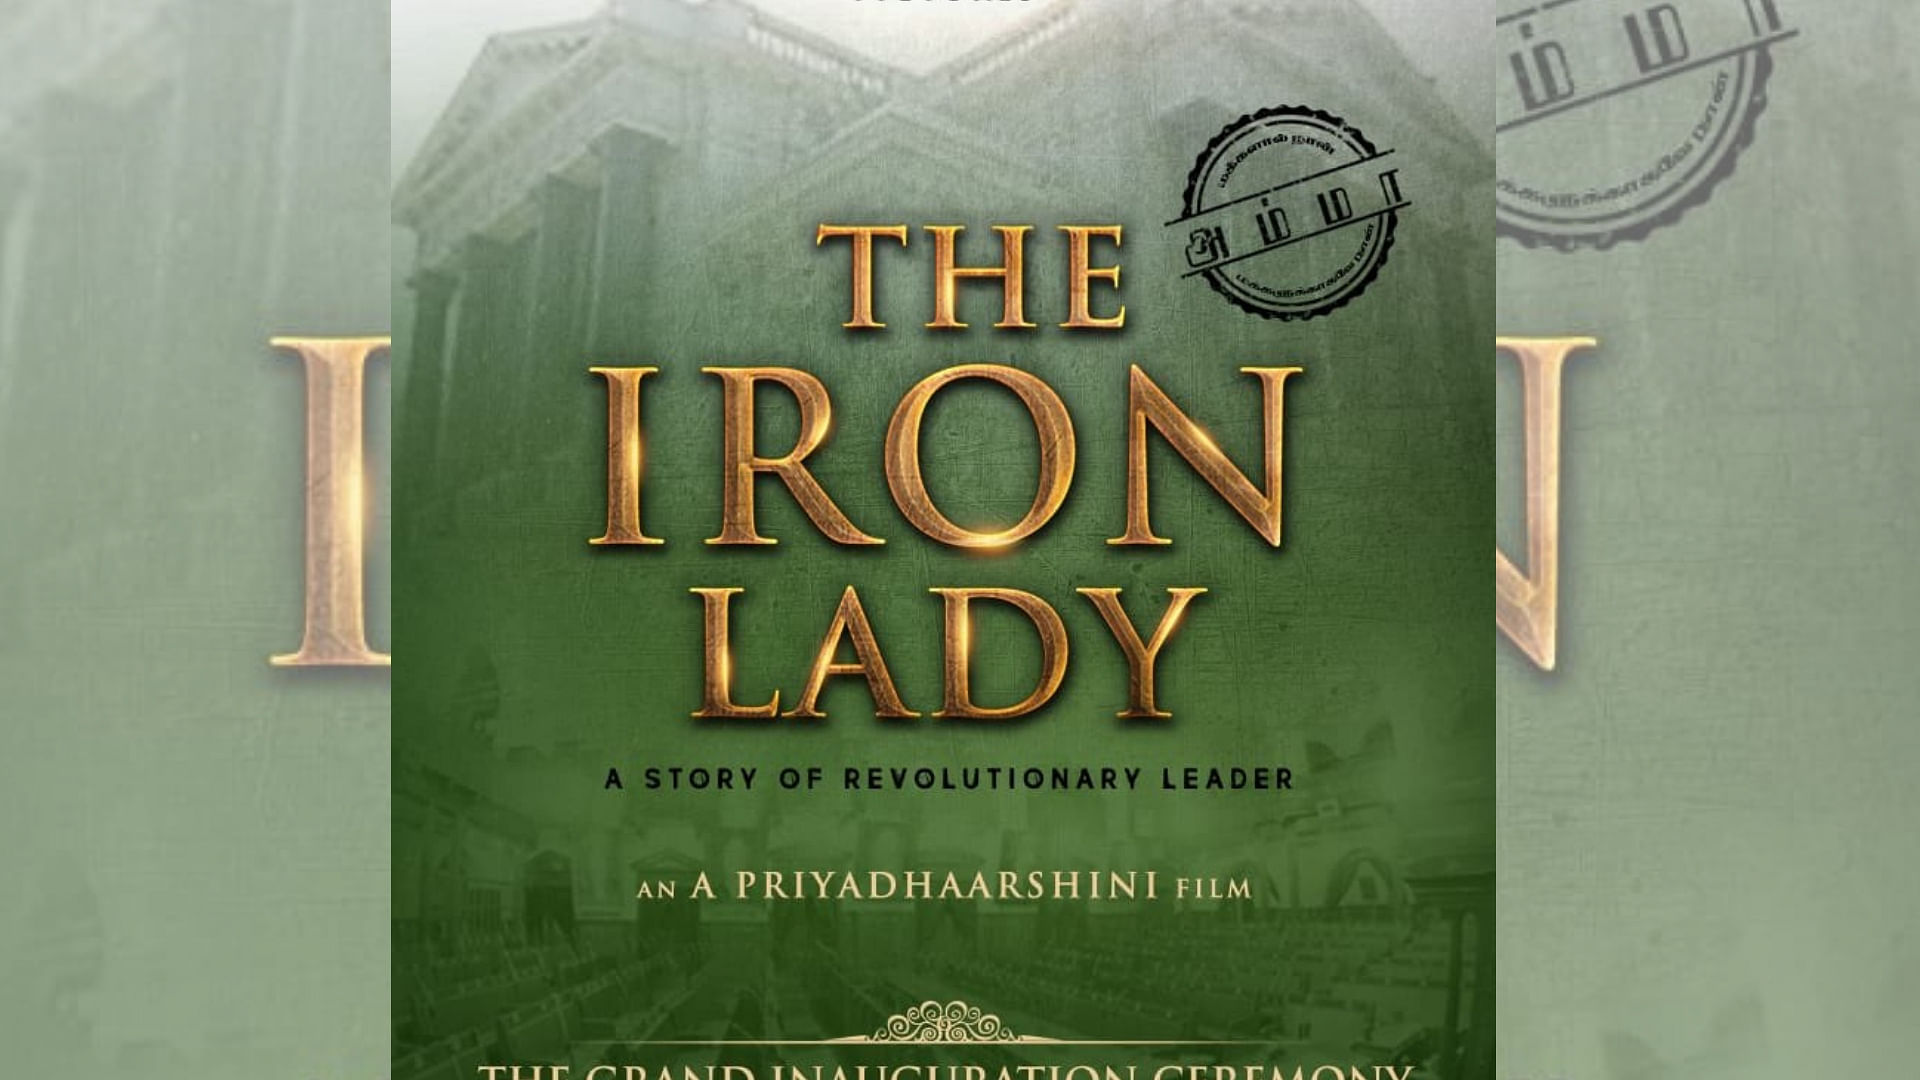 The poster of ‘The Iron Lady’.